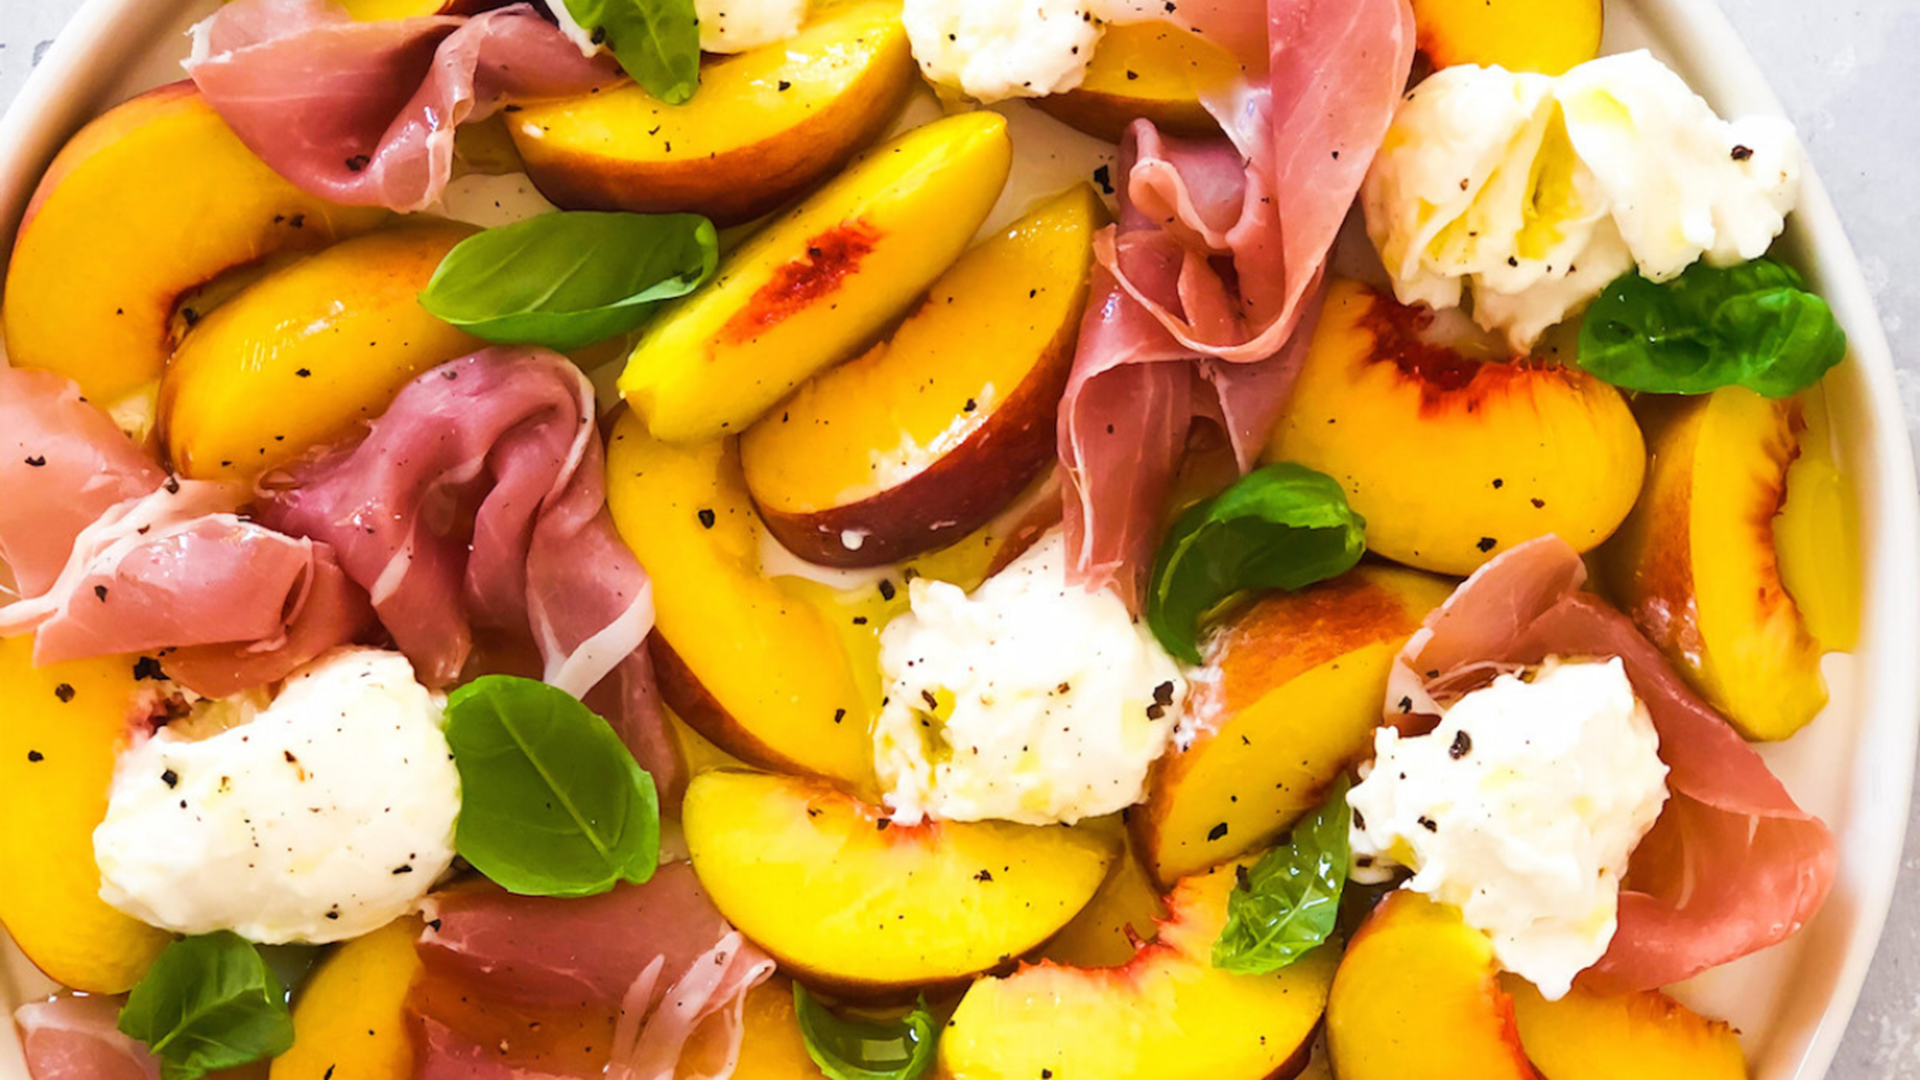 Debbie Arnold with Dining with Debbie shares a delicious recipe for peach, prosciutto, burrata and basil salad.